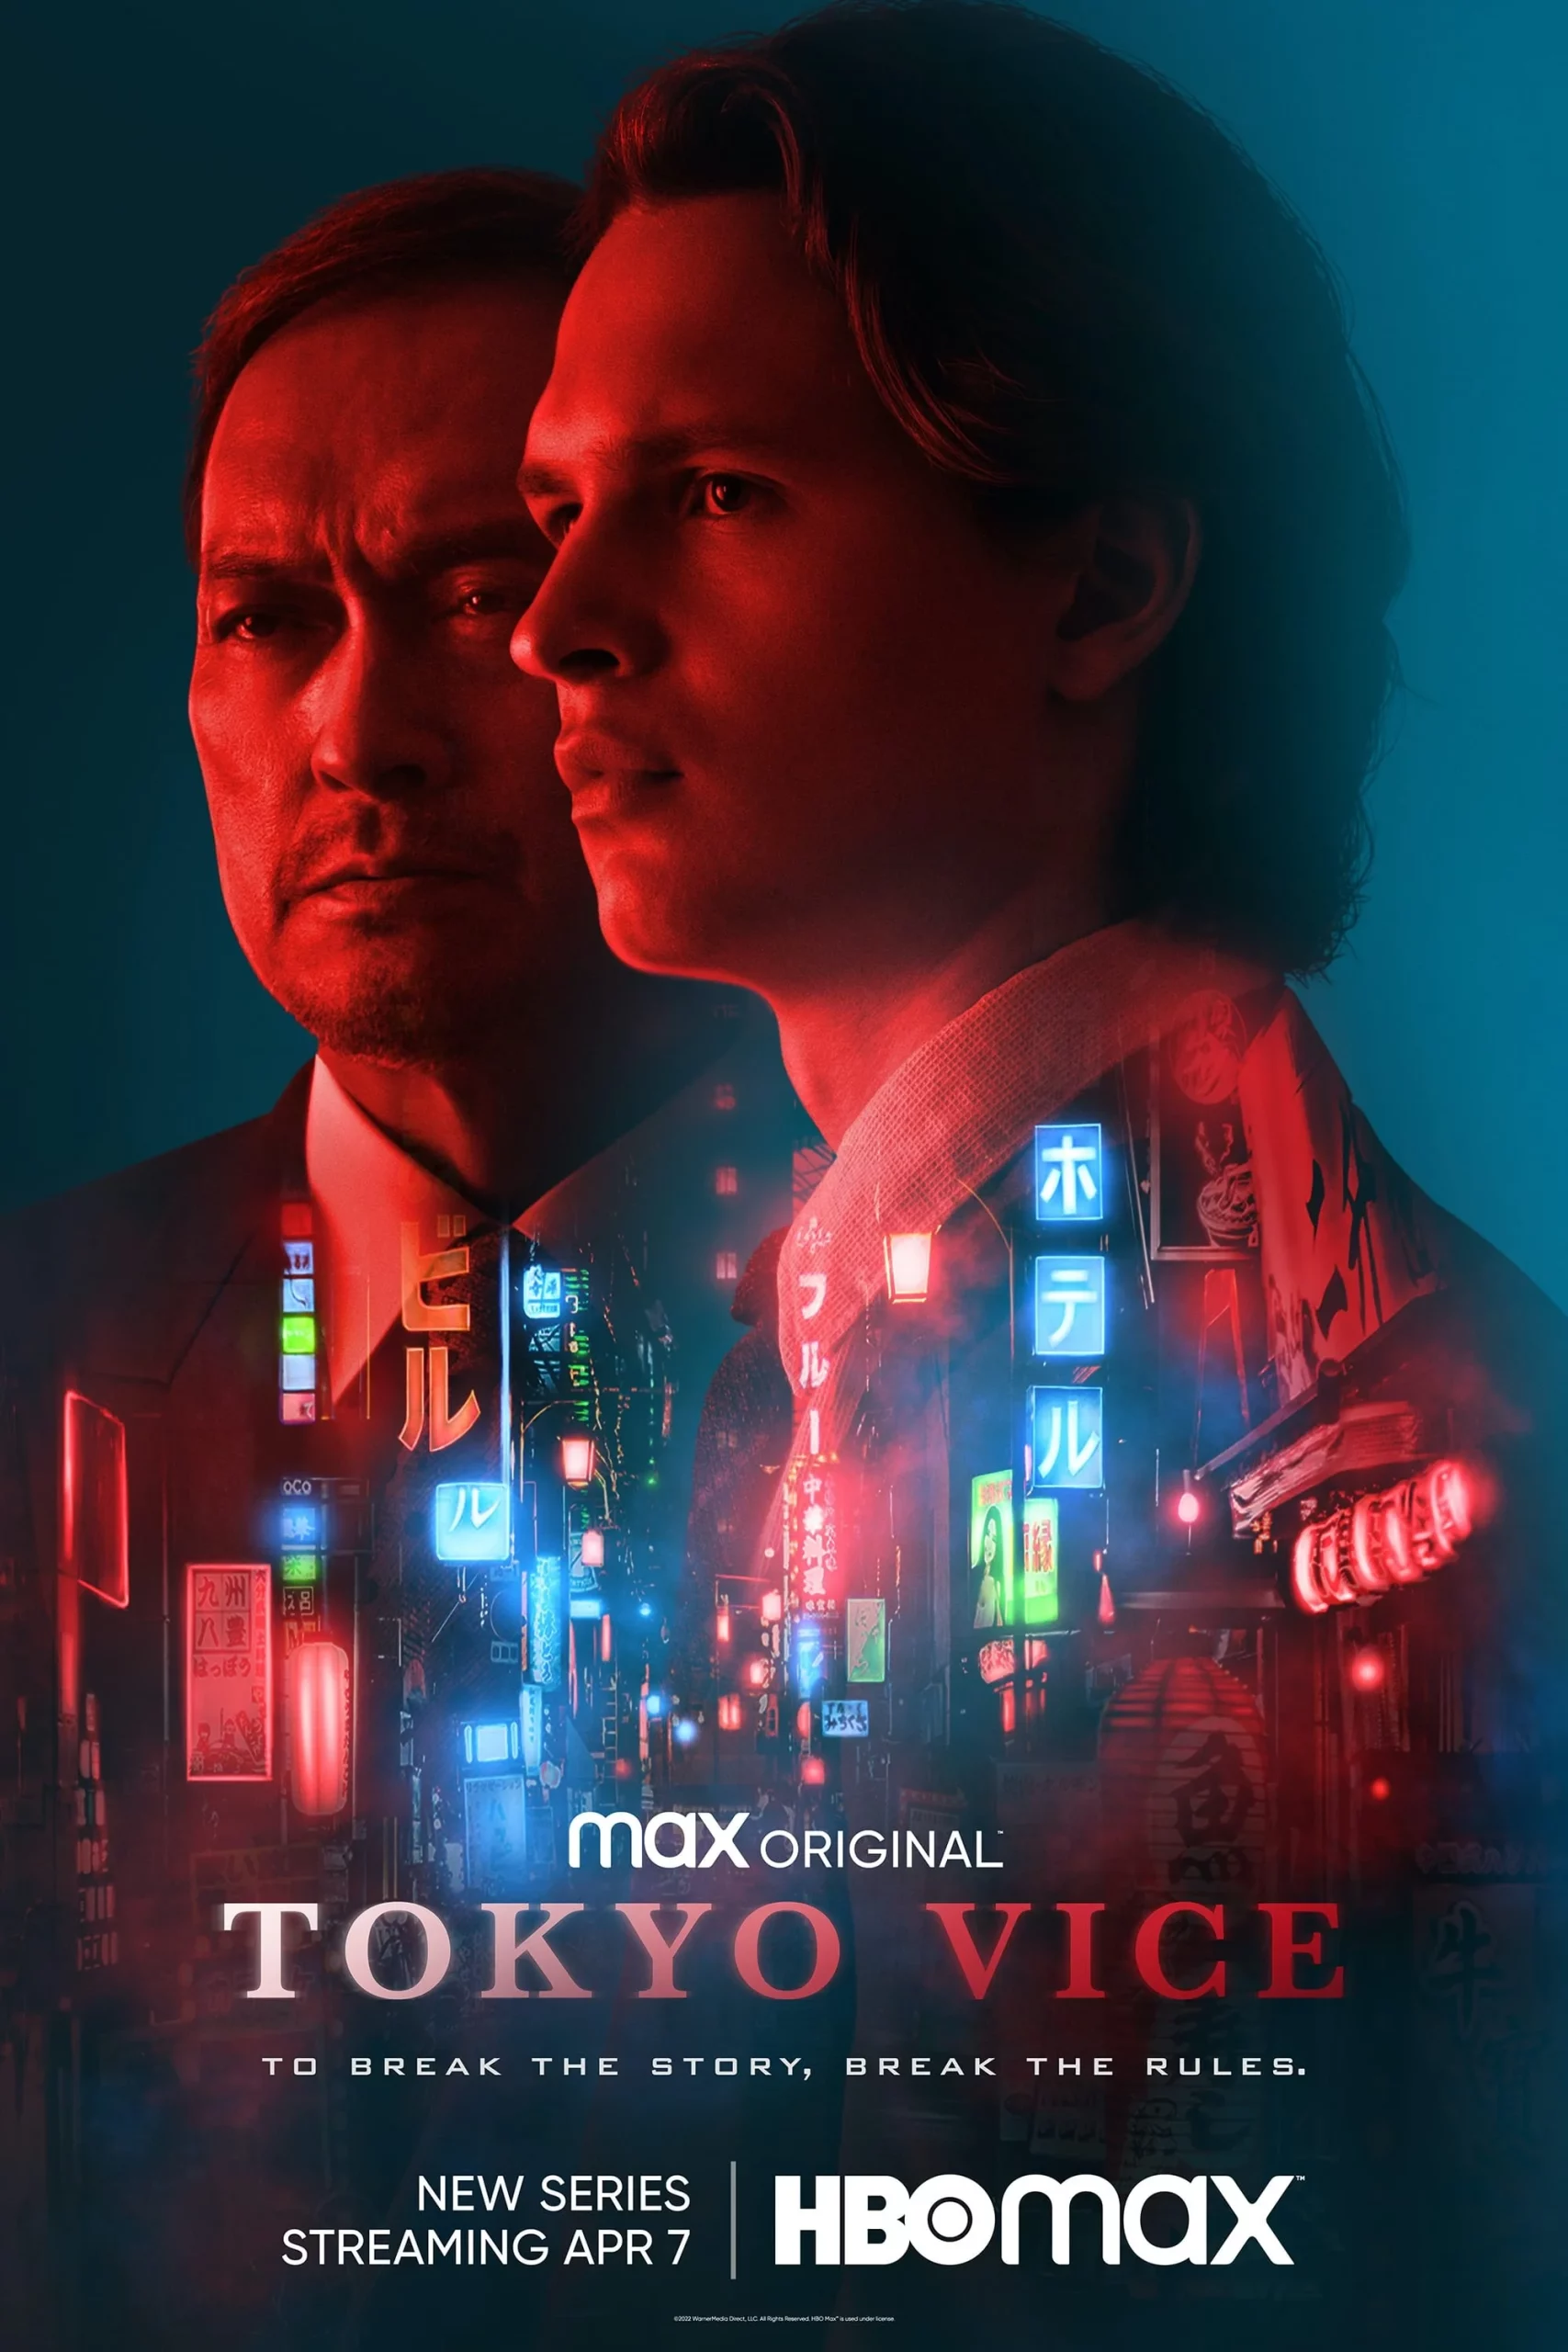 Japan-US crime drama "Tokyo Vice" releases Official Trailer